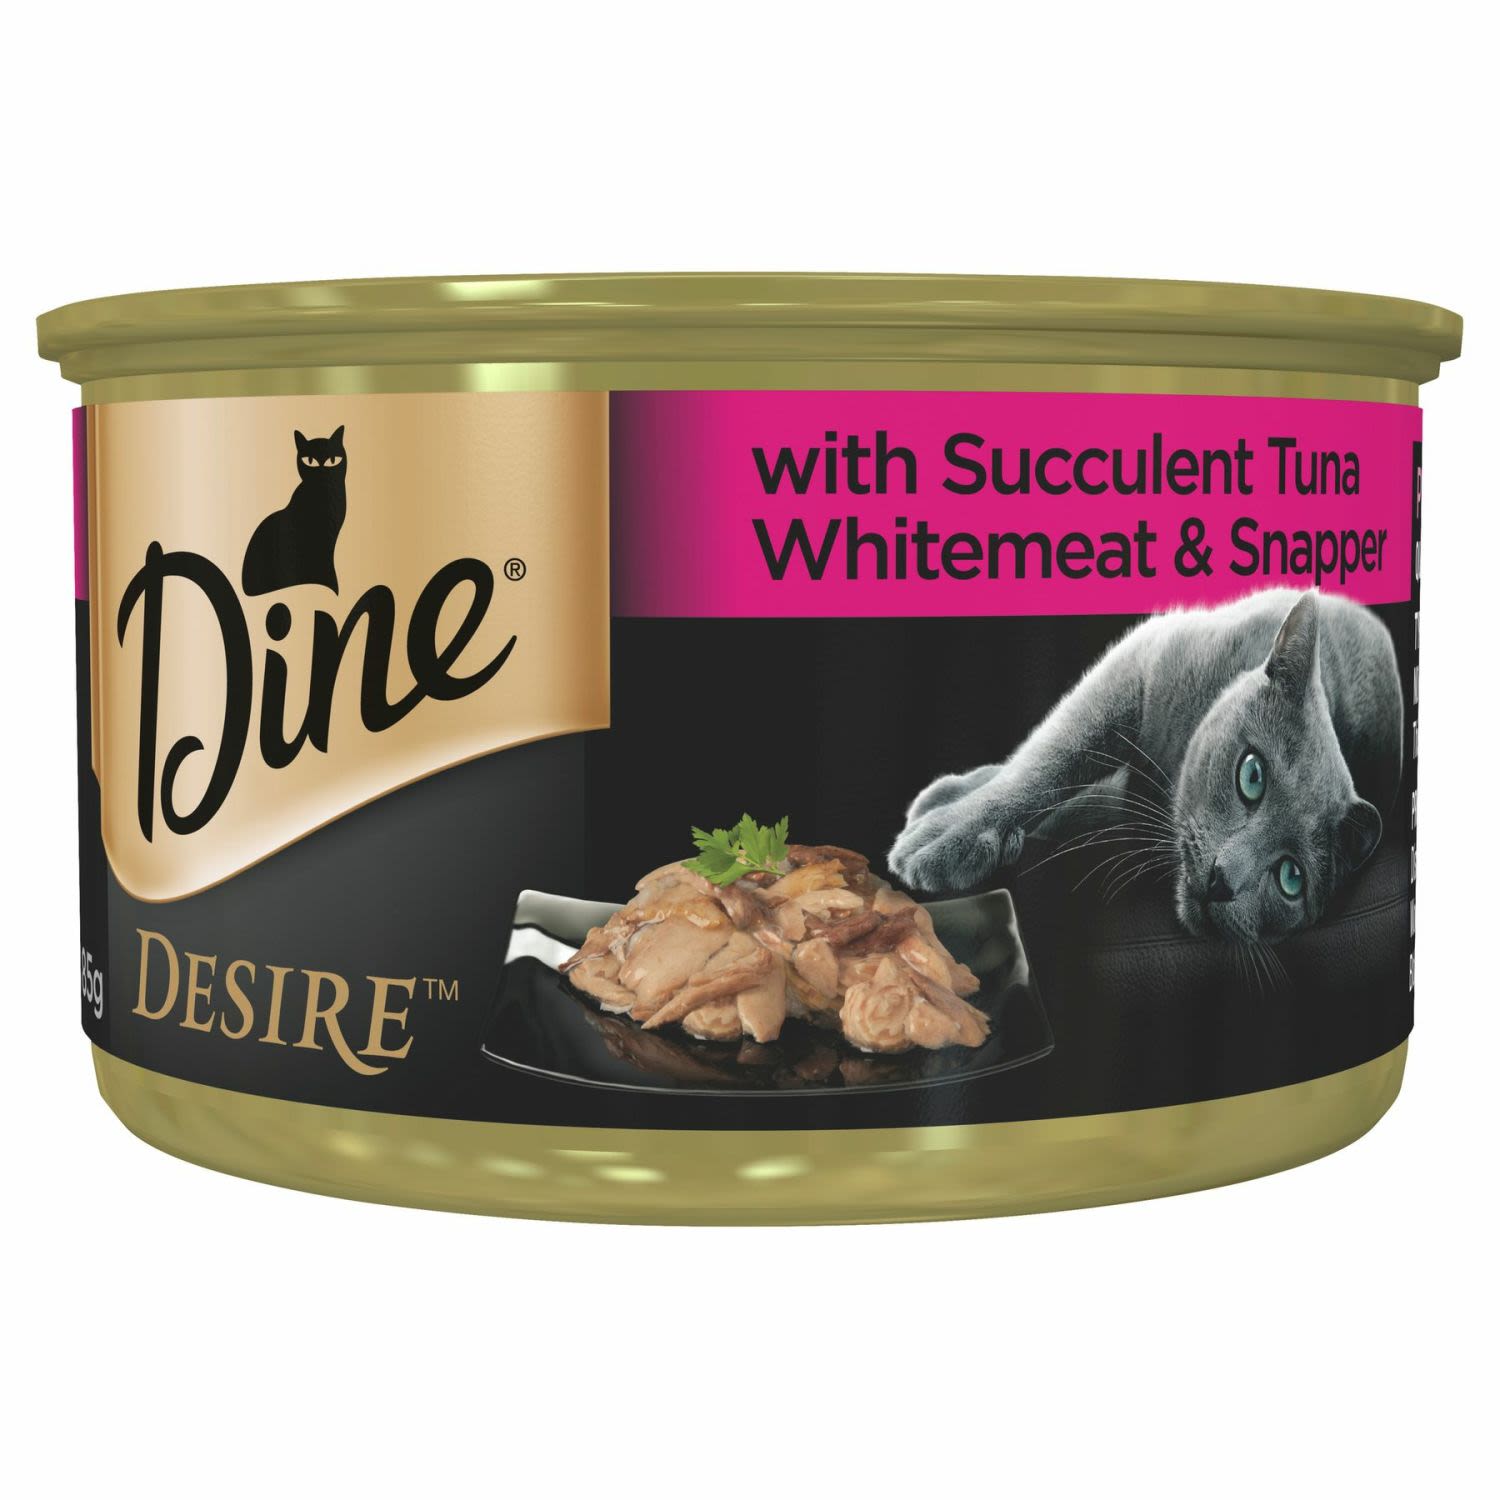 Dine Desire Tuna With Meat Snapper Grain Free Wet Cat Food Can, 85 Gram